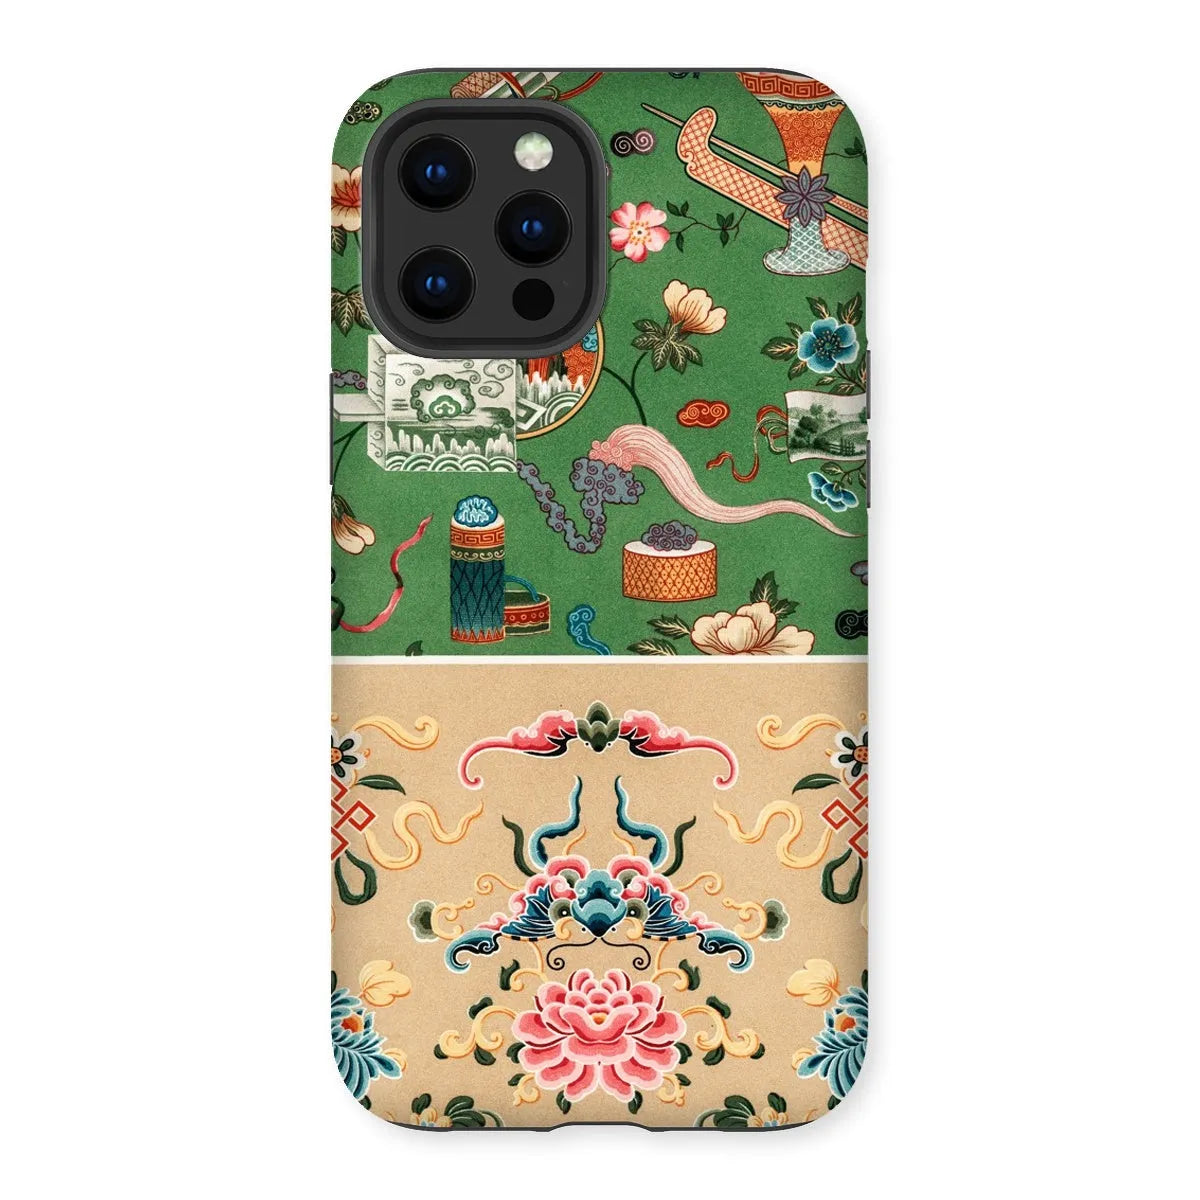 This Chinese Pattern By Auguste Racinet Tough Phone Case - Iphone 12 Pro Max / Matte - Mobile Phone Cases - Aesthetic